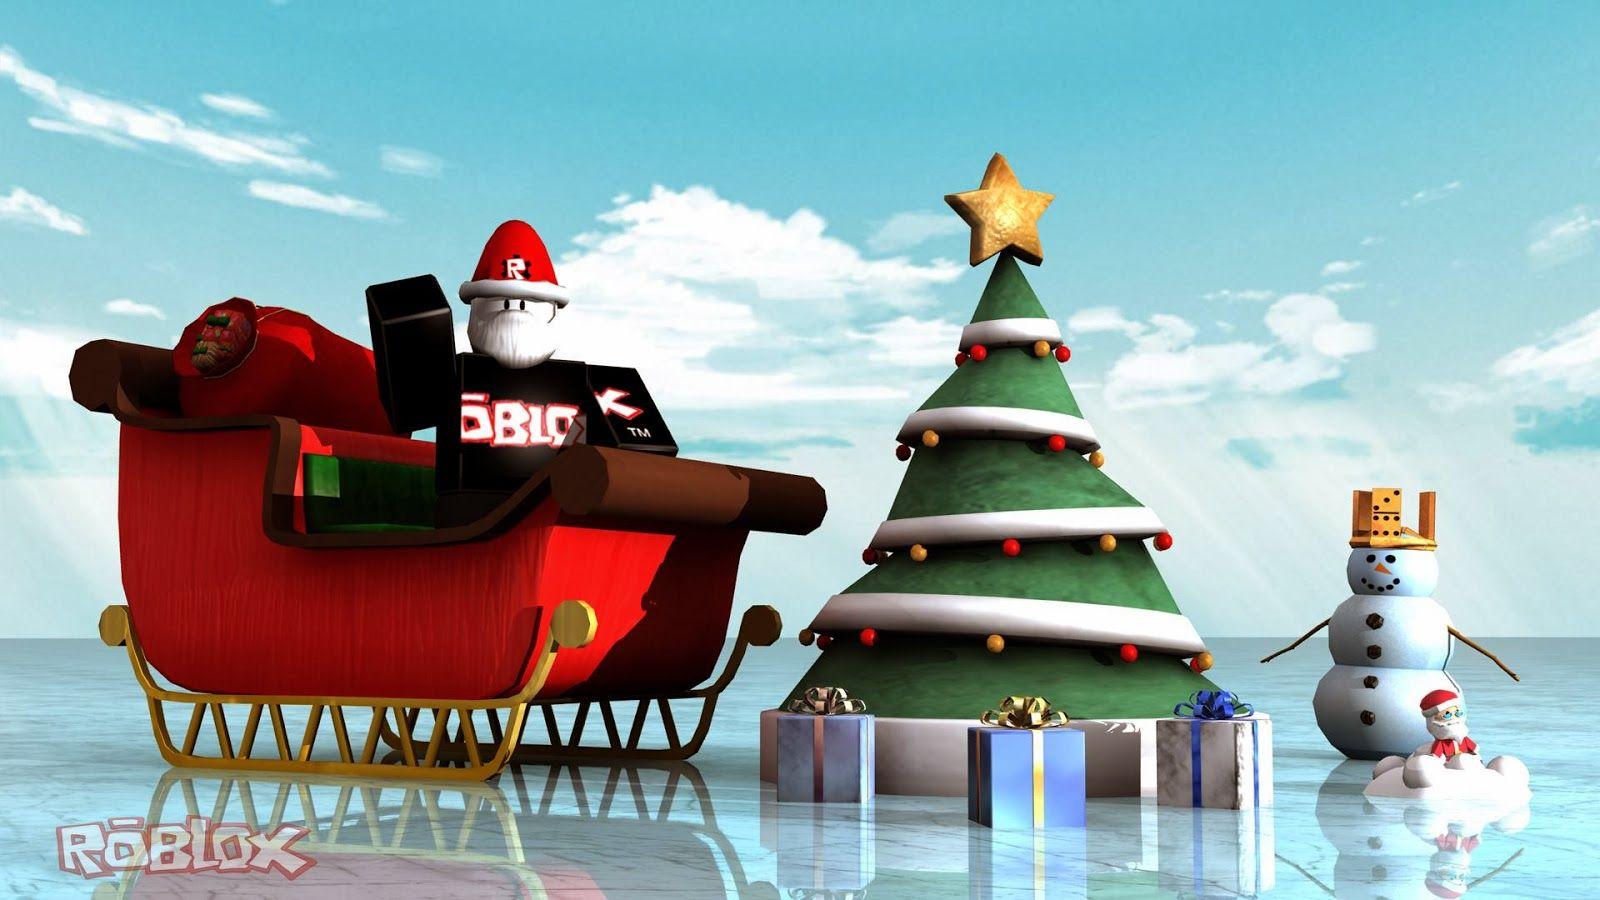 Christmas Roblox Wallpapers Top Free Christmas Roblox Backgrounds Wallpaperaccess - roblox christmas pictures